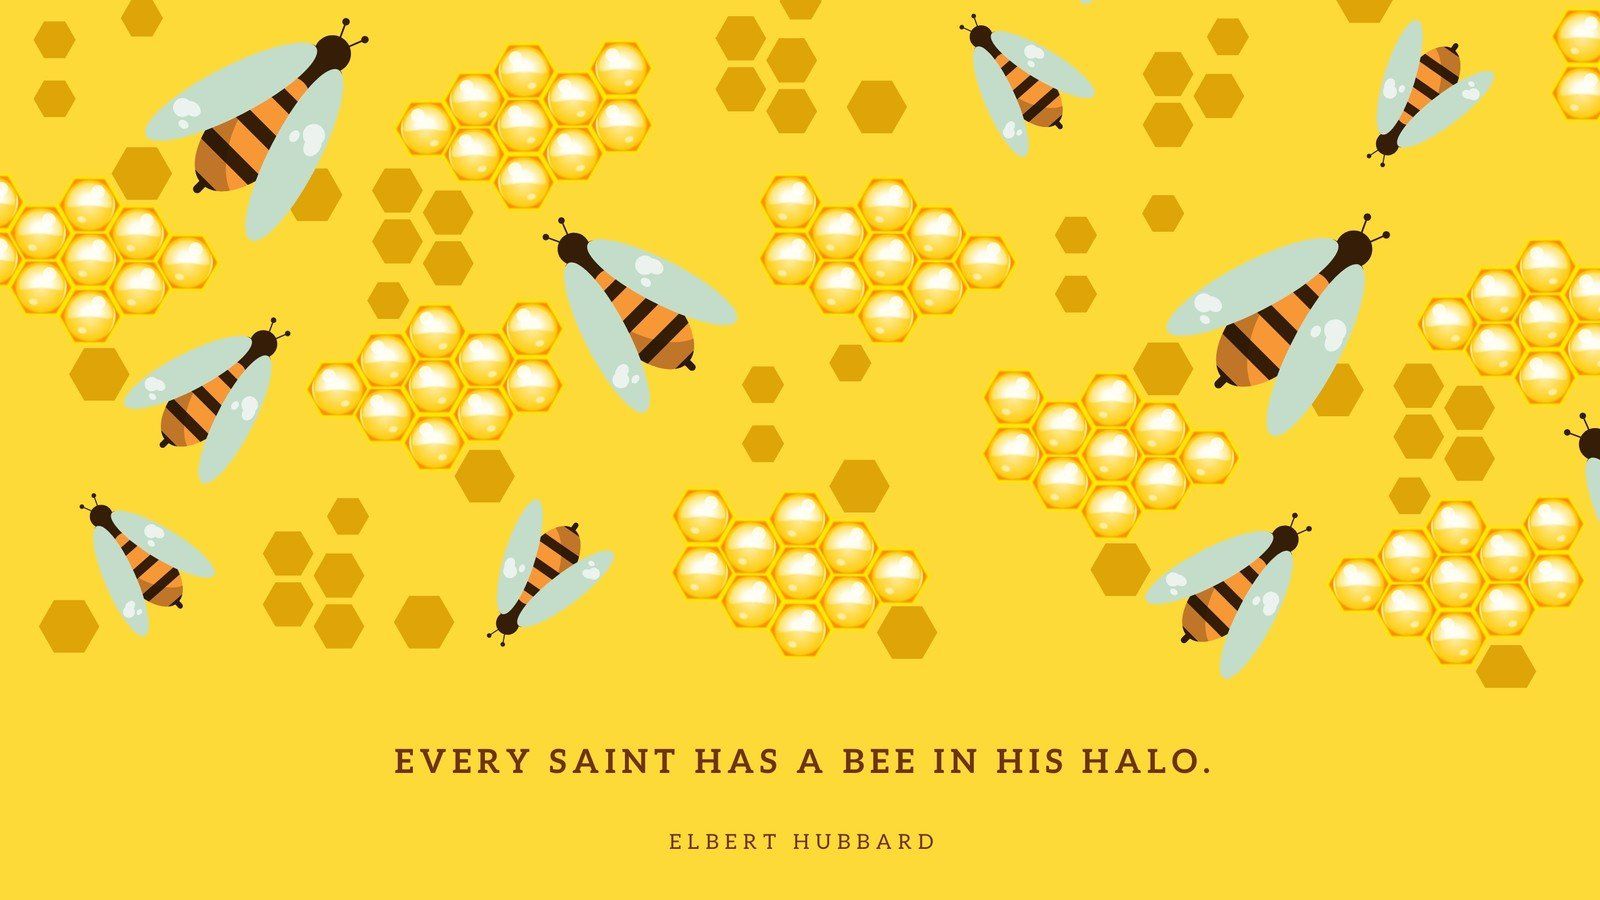 Every saint has a bee in his palio - Funny, bee